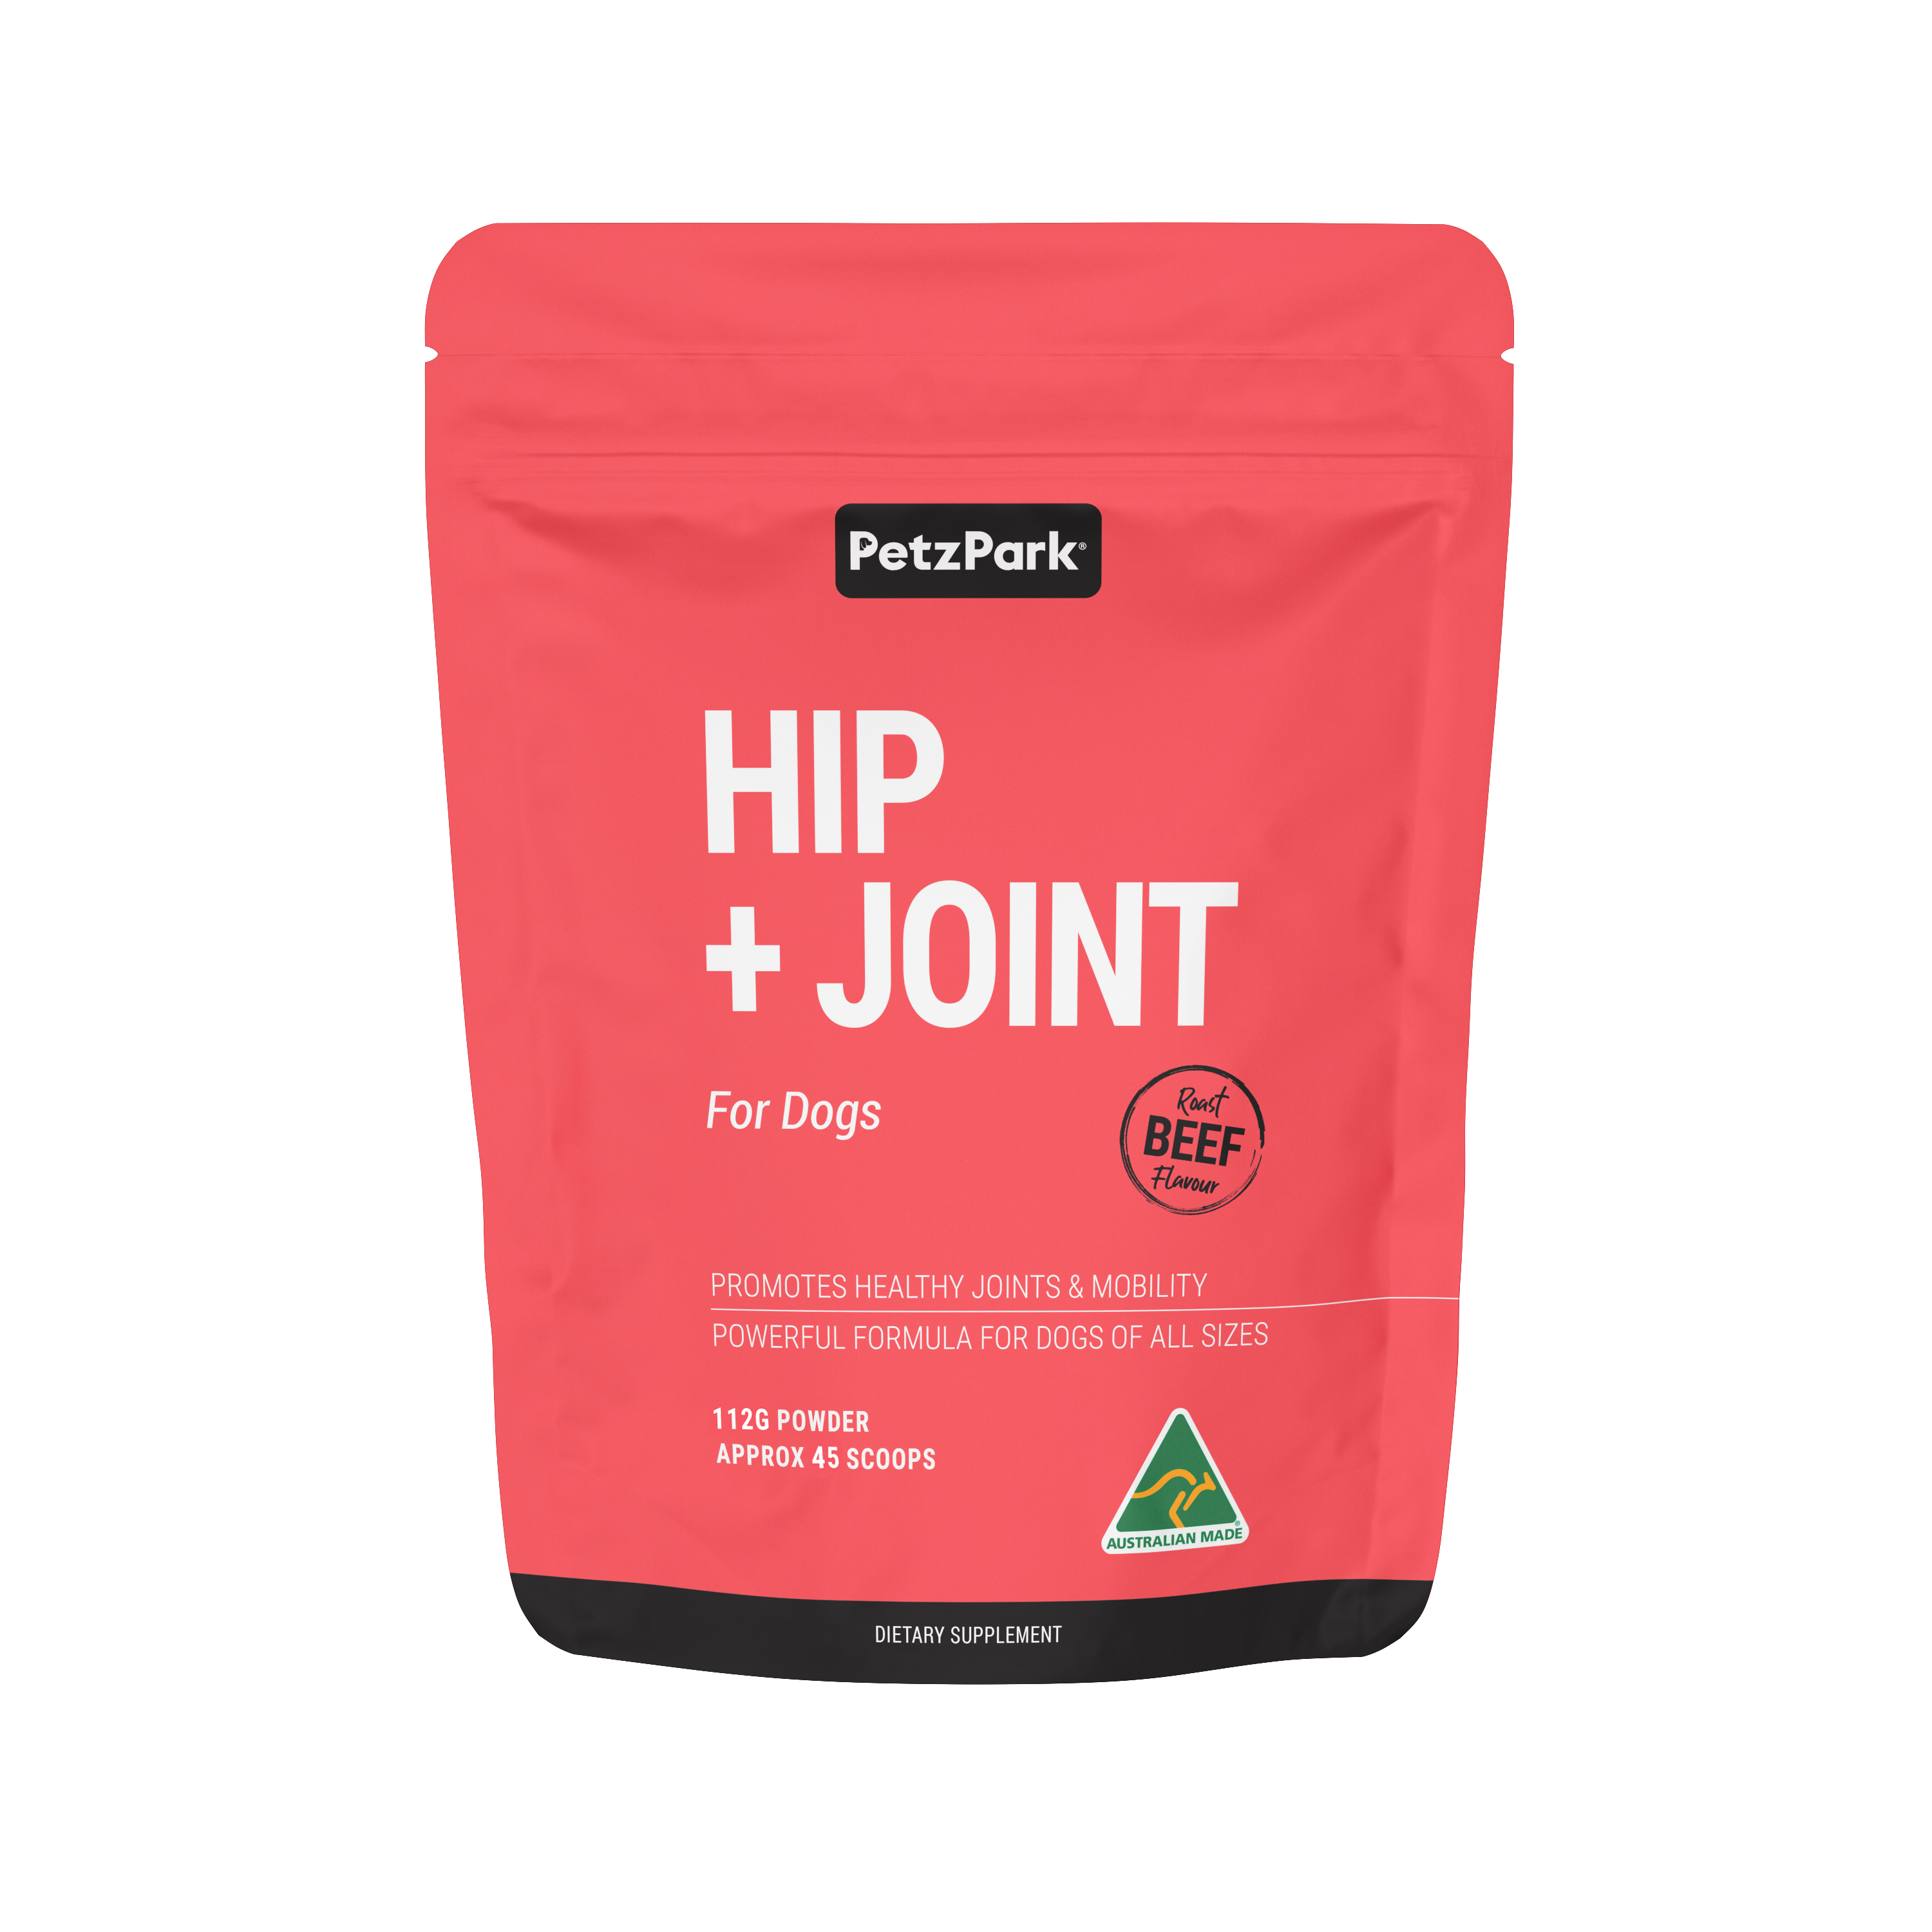 Petz Park’s Hip + Joint for Dogs, roast beef flavored powder supplement for dog’s arthritis, hip dysplasia & growing pains.